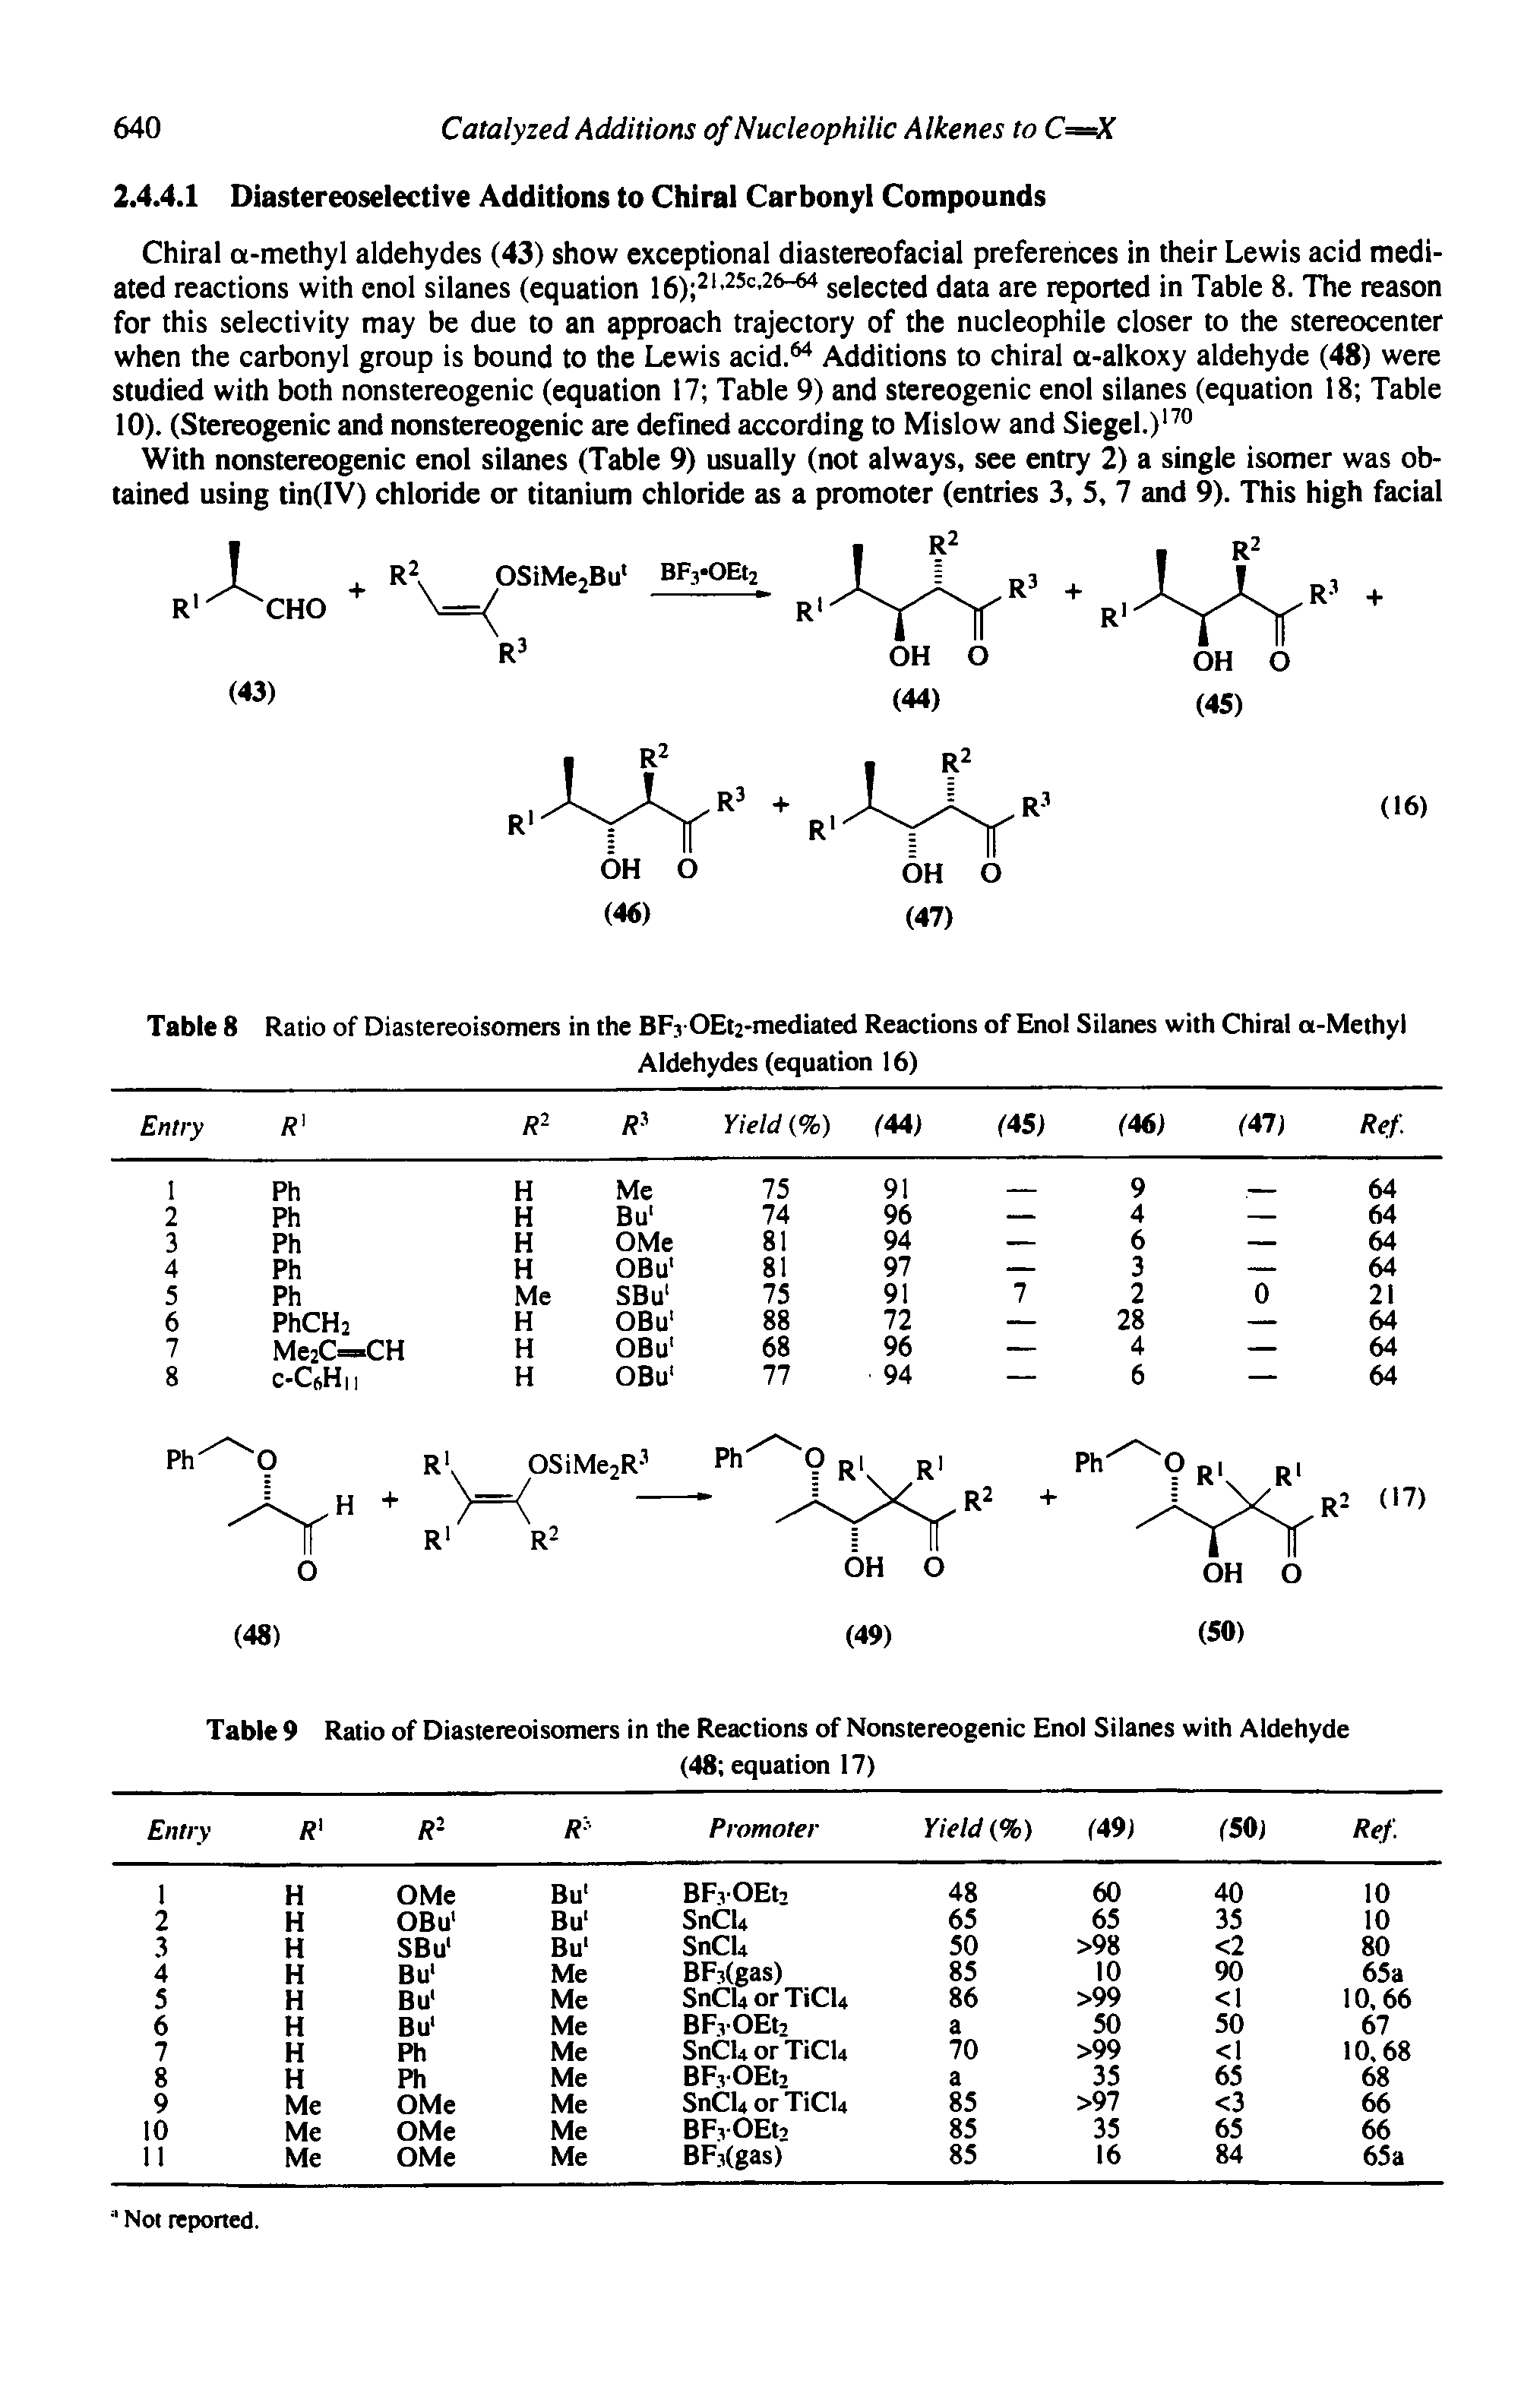 Table 8 Ratio of Diastereoisomers in the BF3 0Et2-mediated Reactions of Enol Silanes with Chiral a-Methyl...